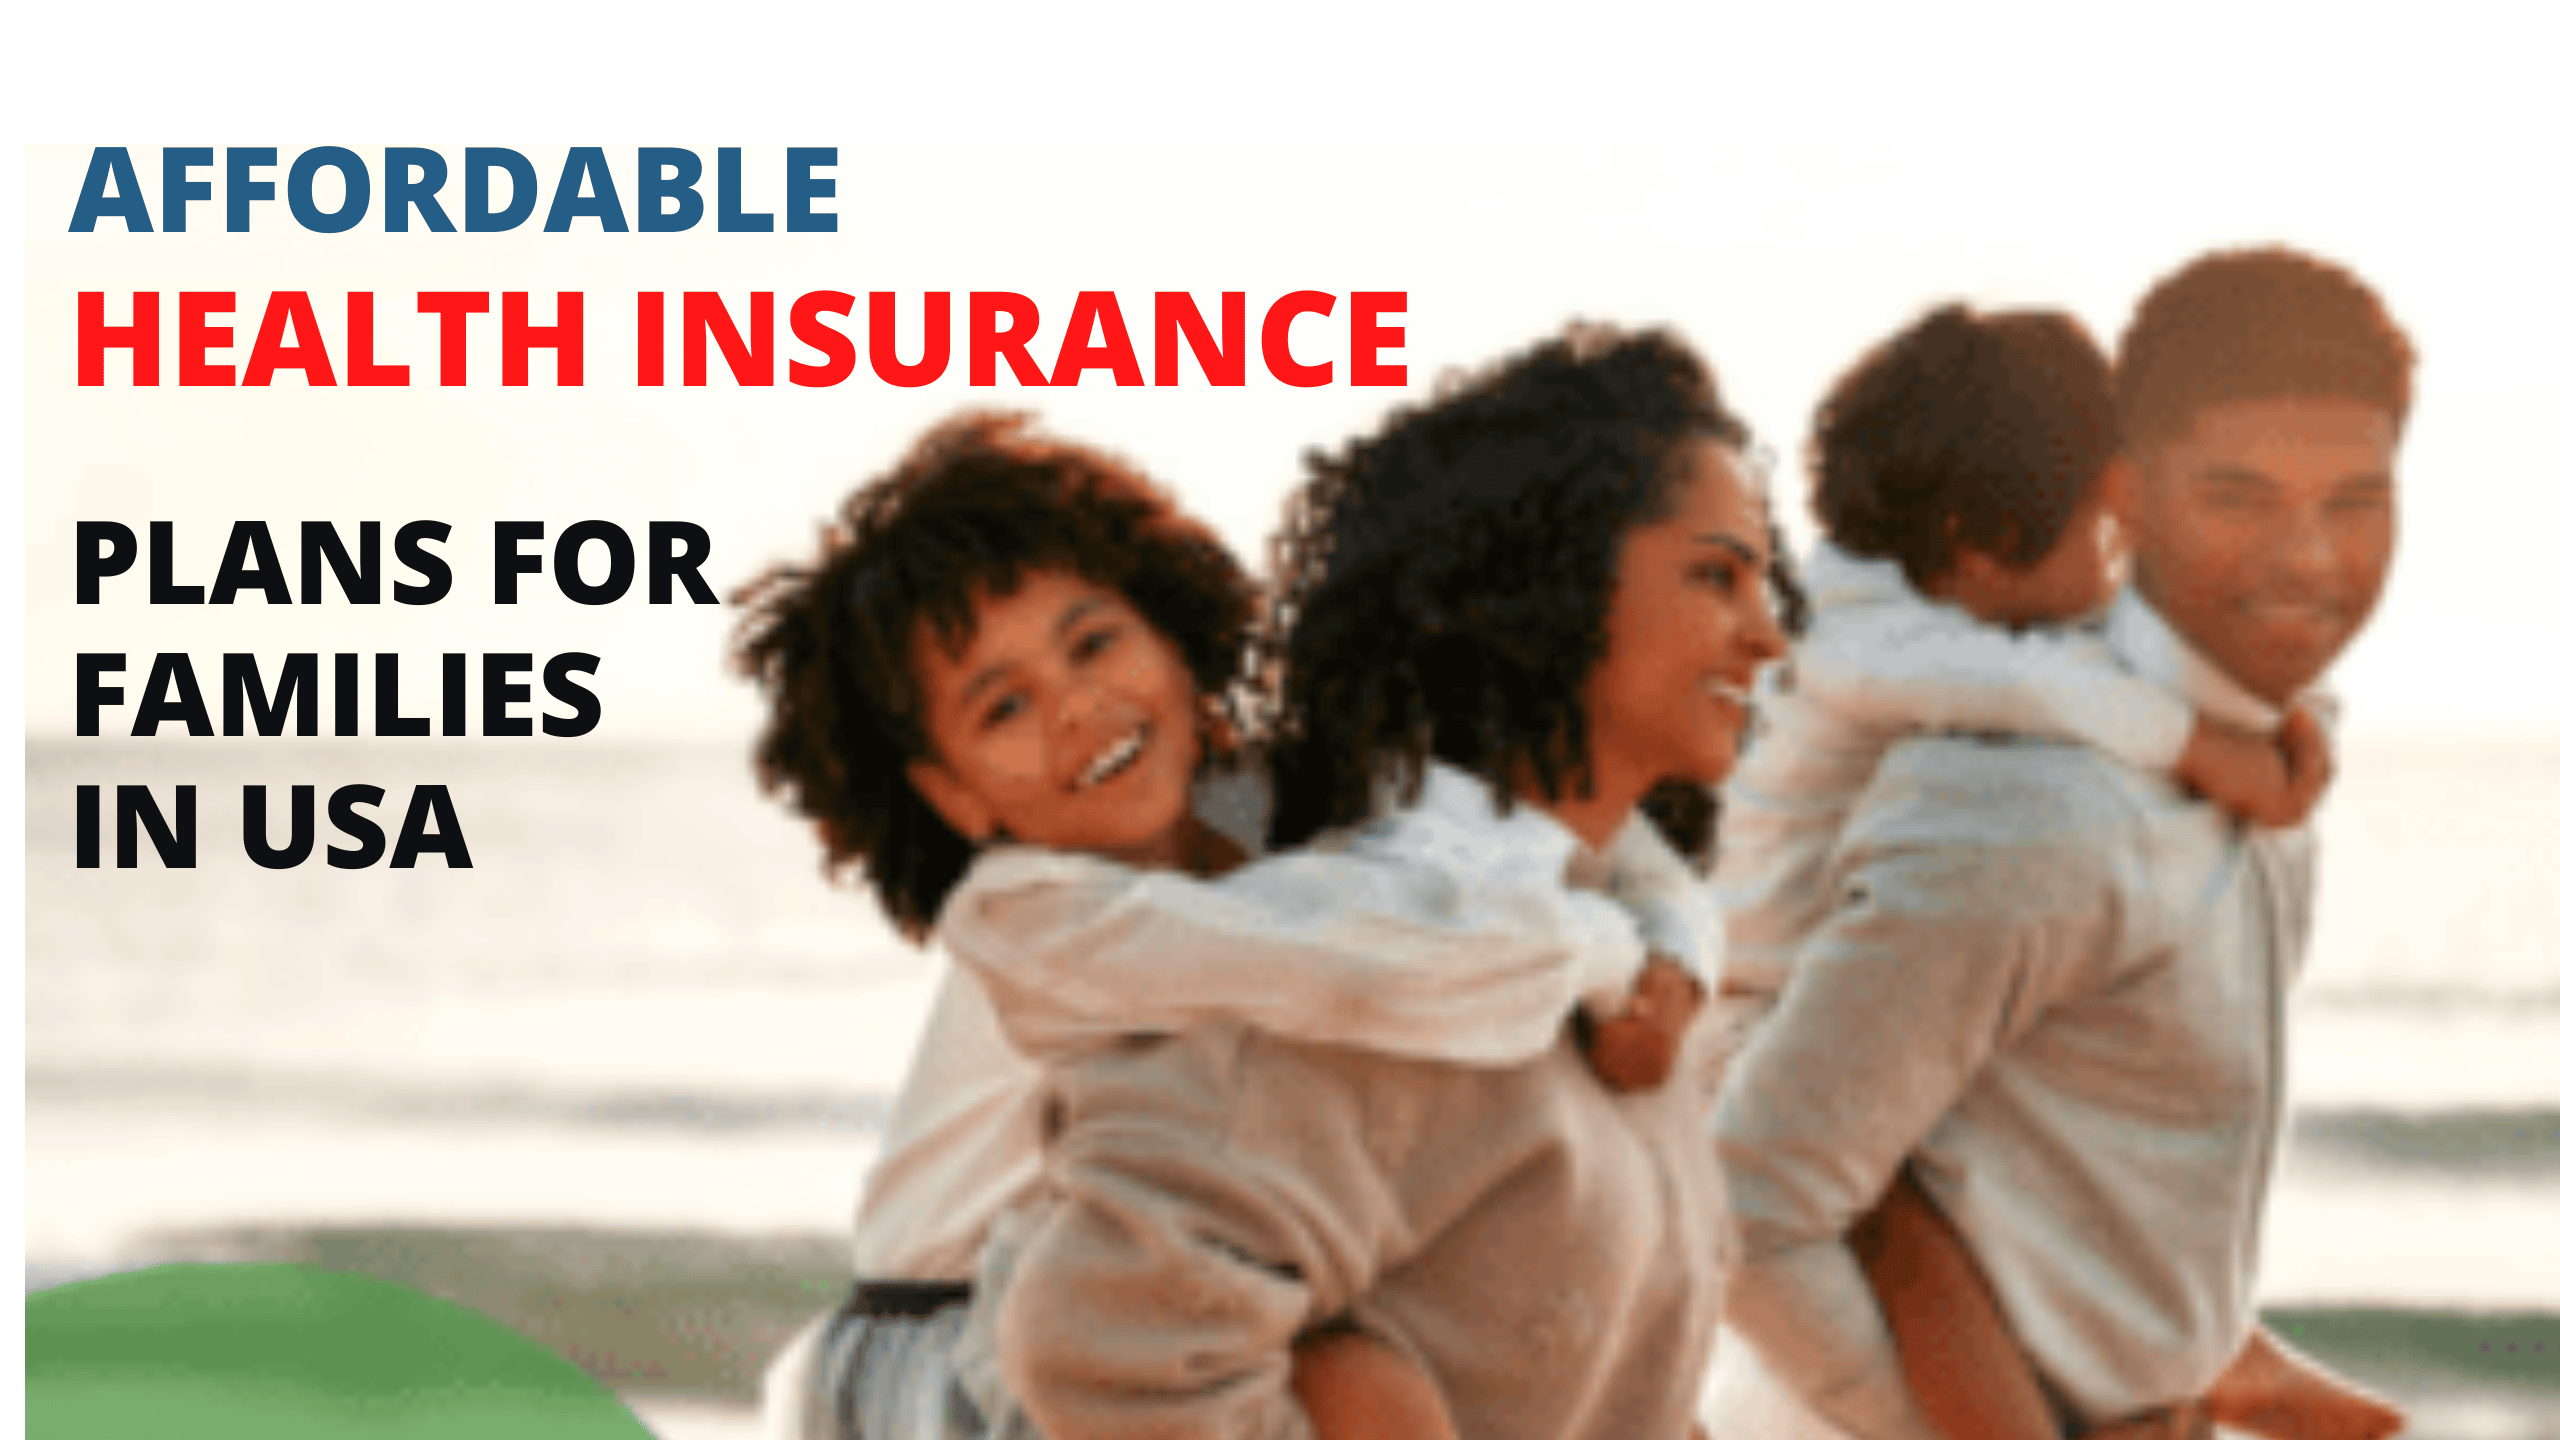 Affordable Health Insurance Plans for Families in the USA 4